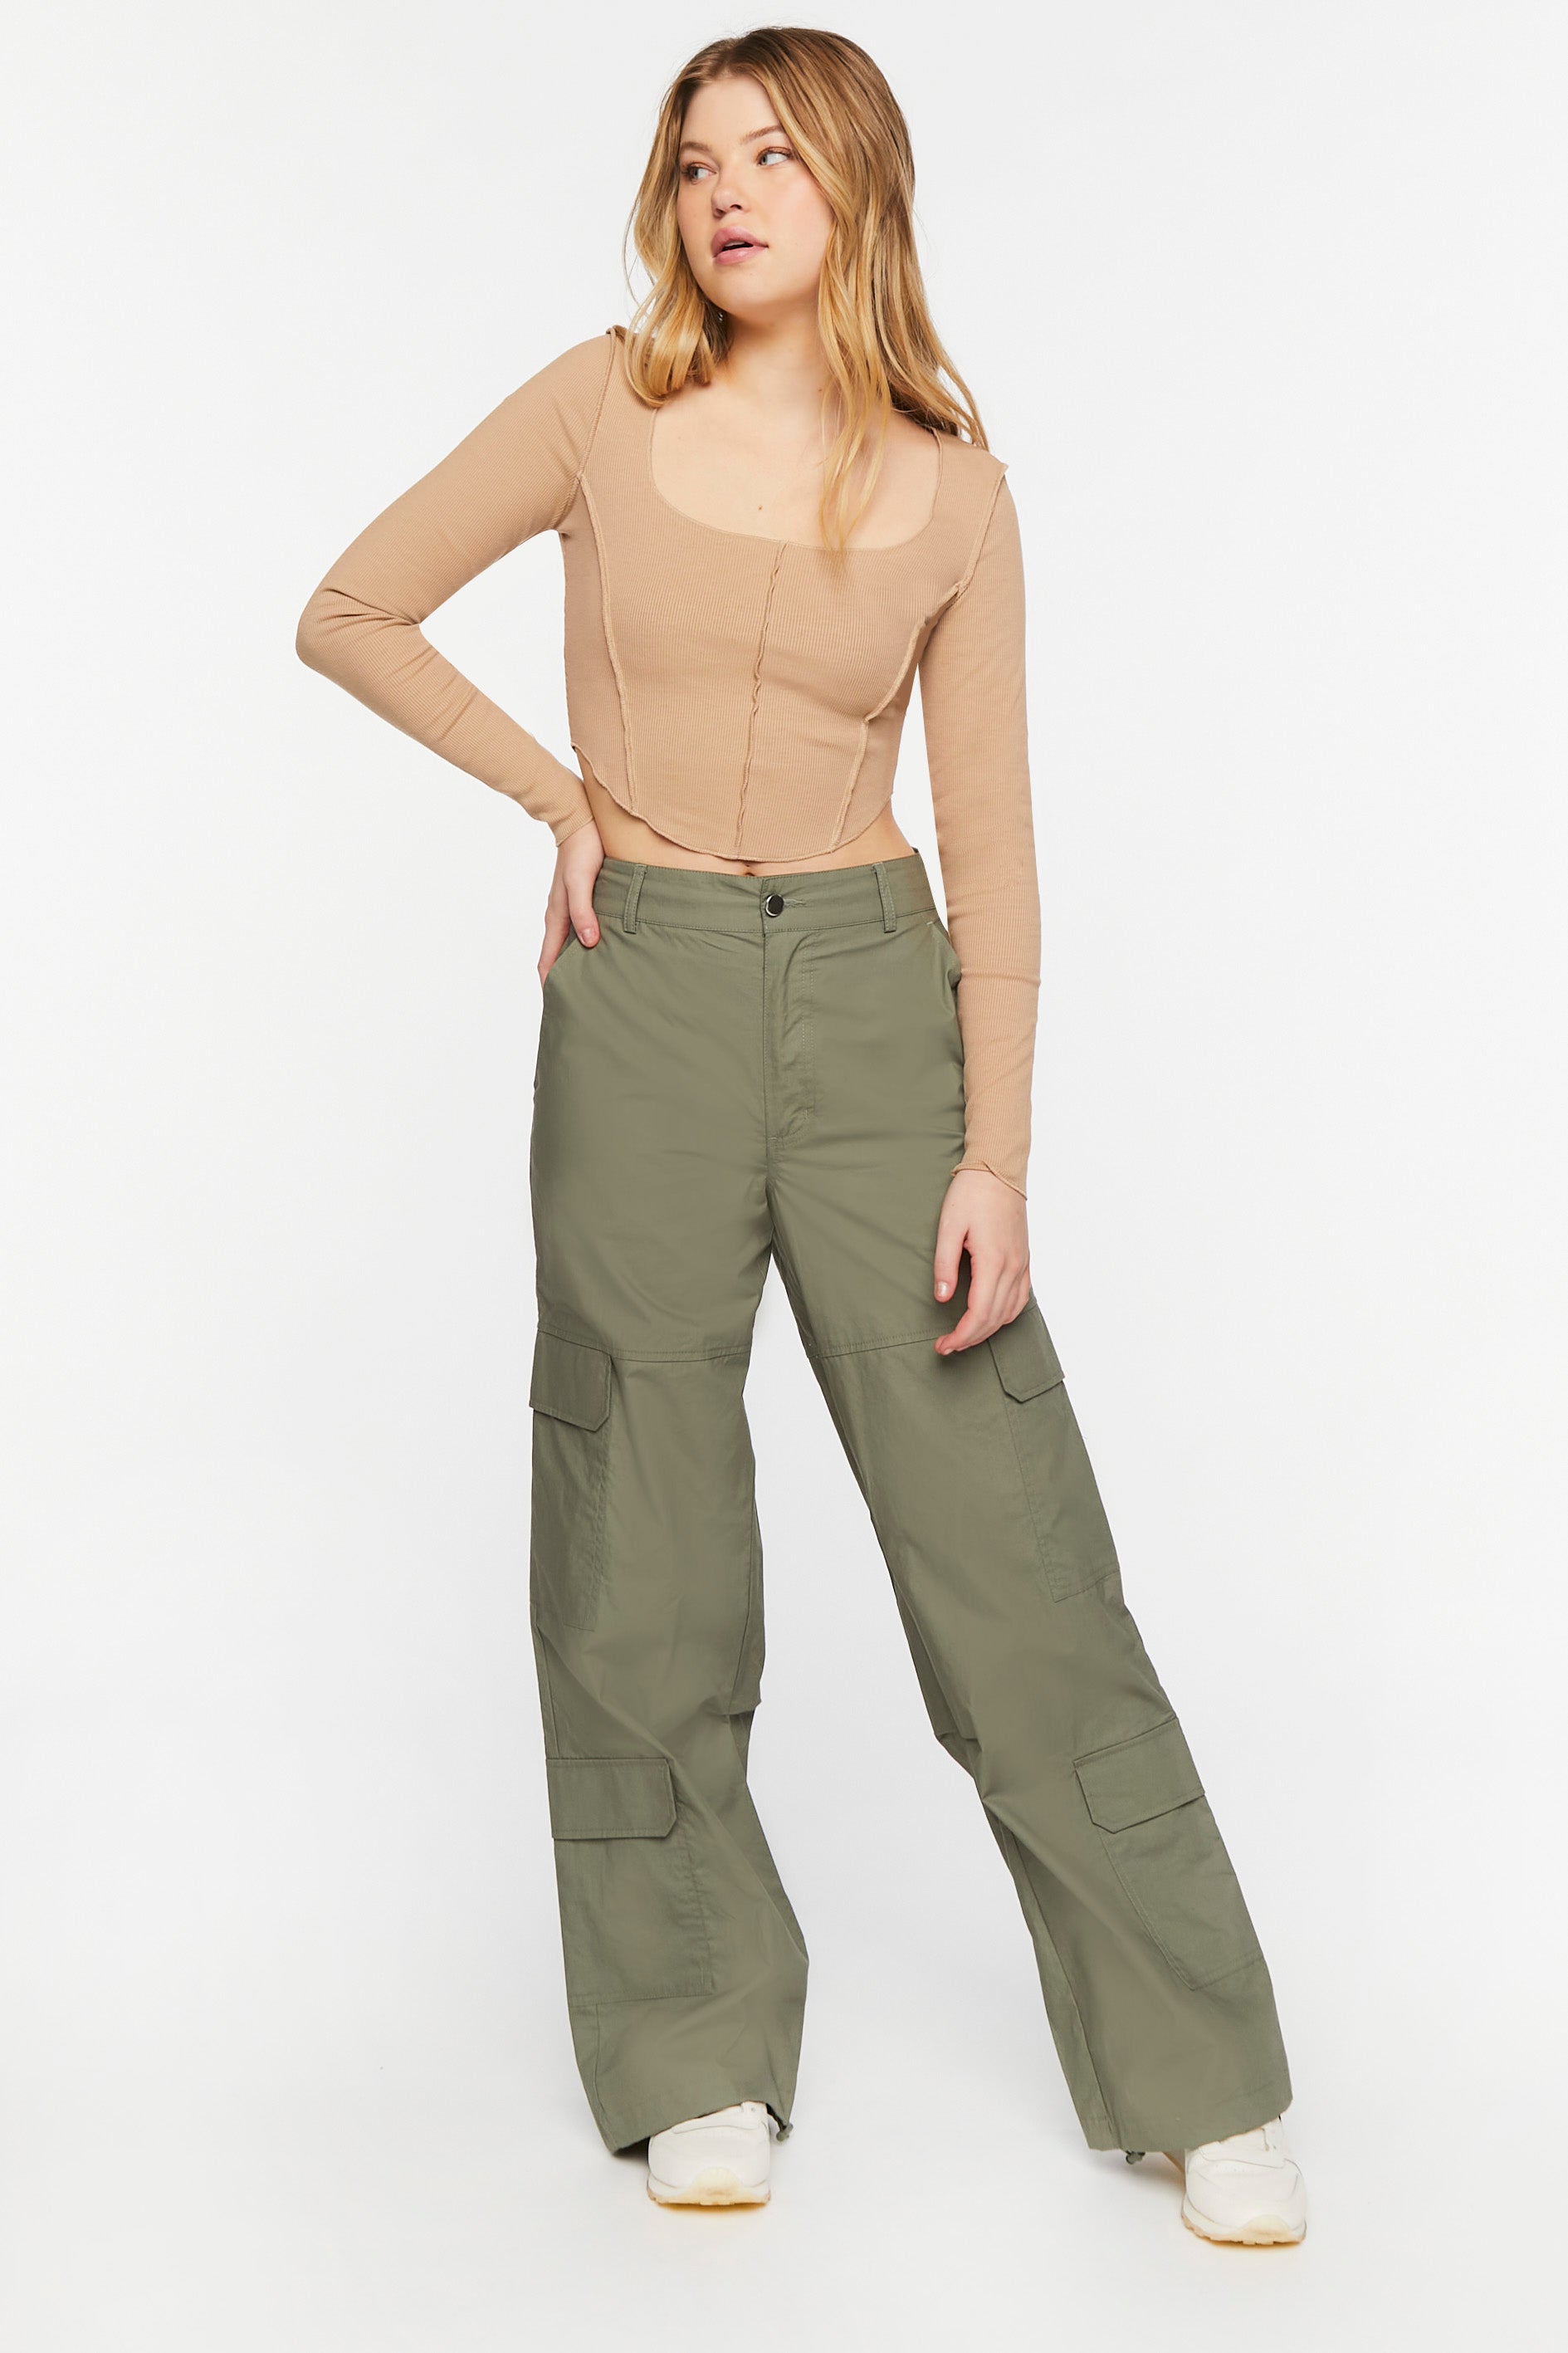 Taupe Exposed Seam Long-Sleeve Crop Top 3